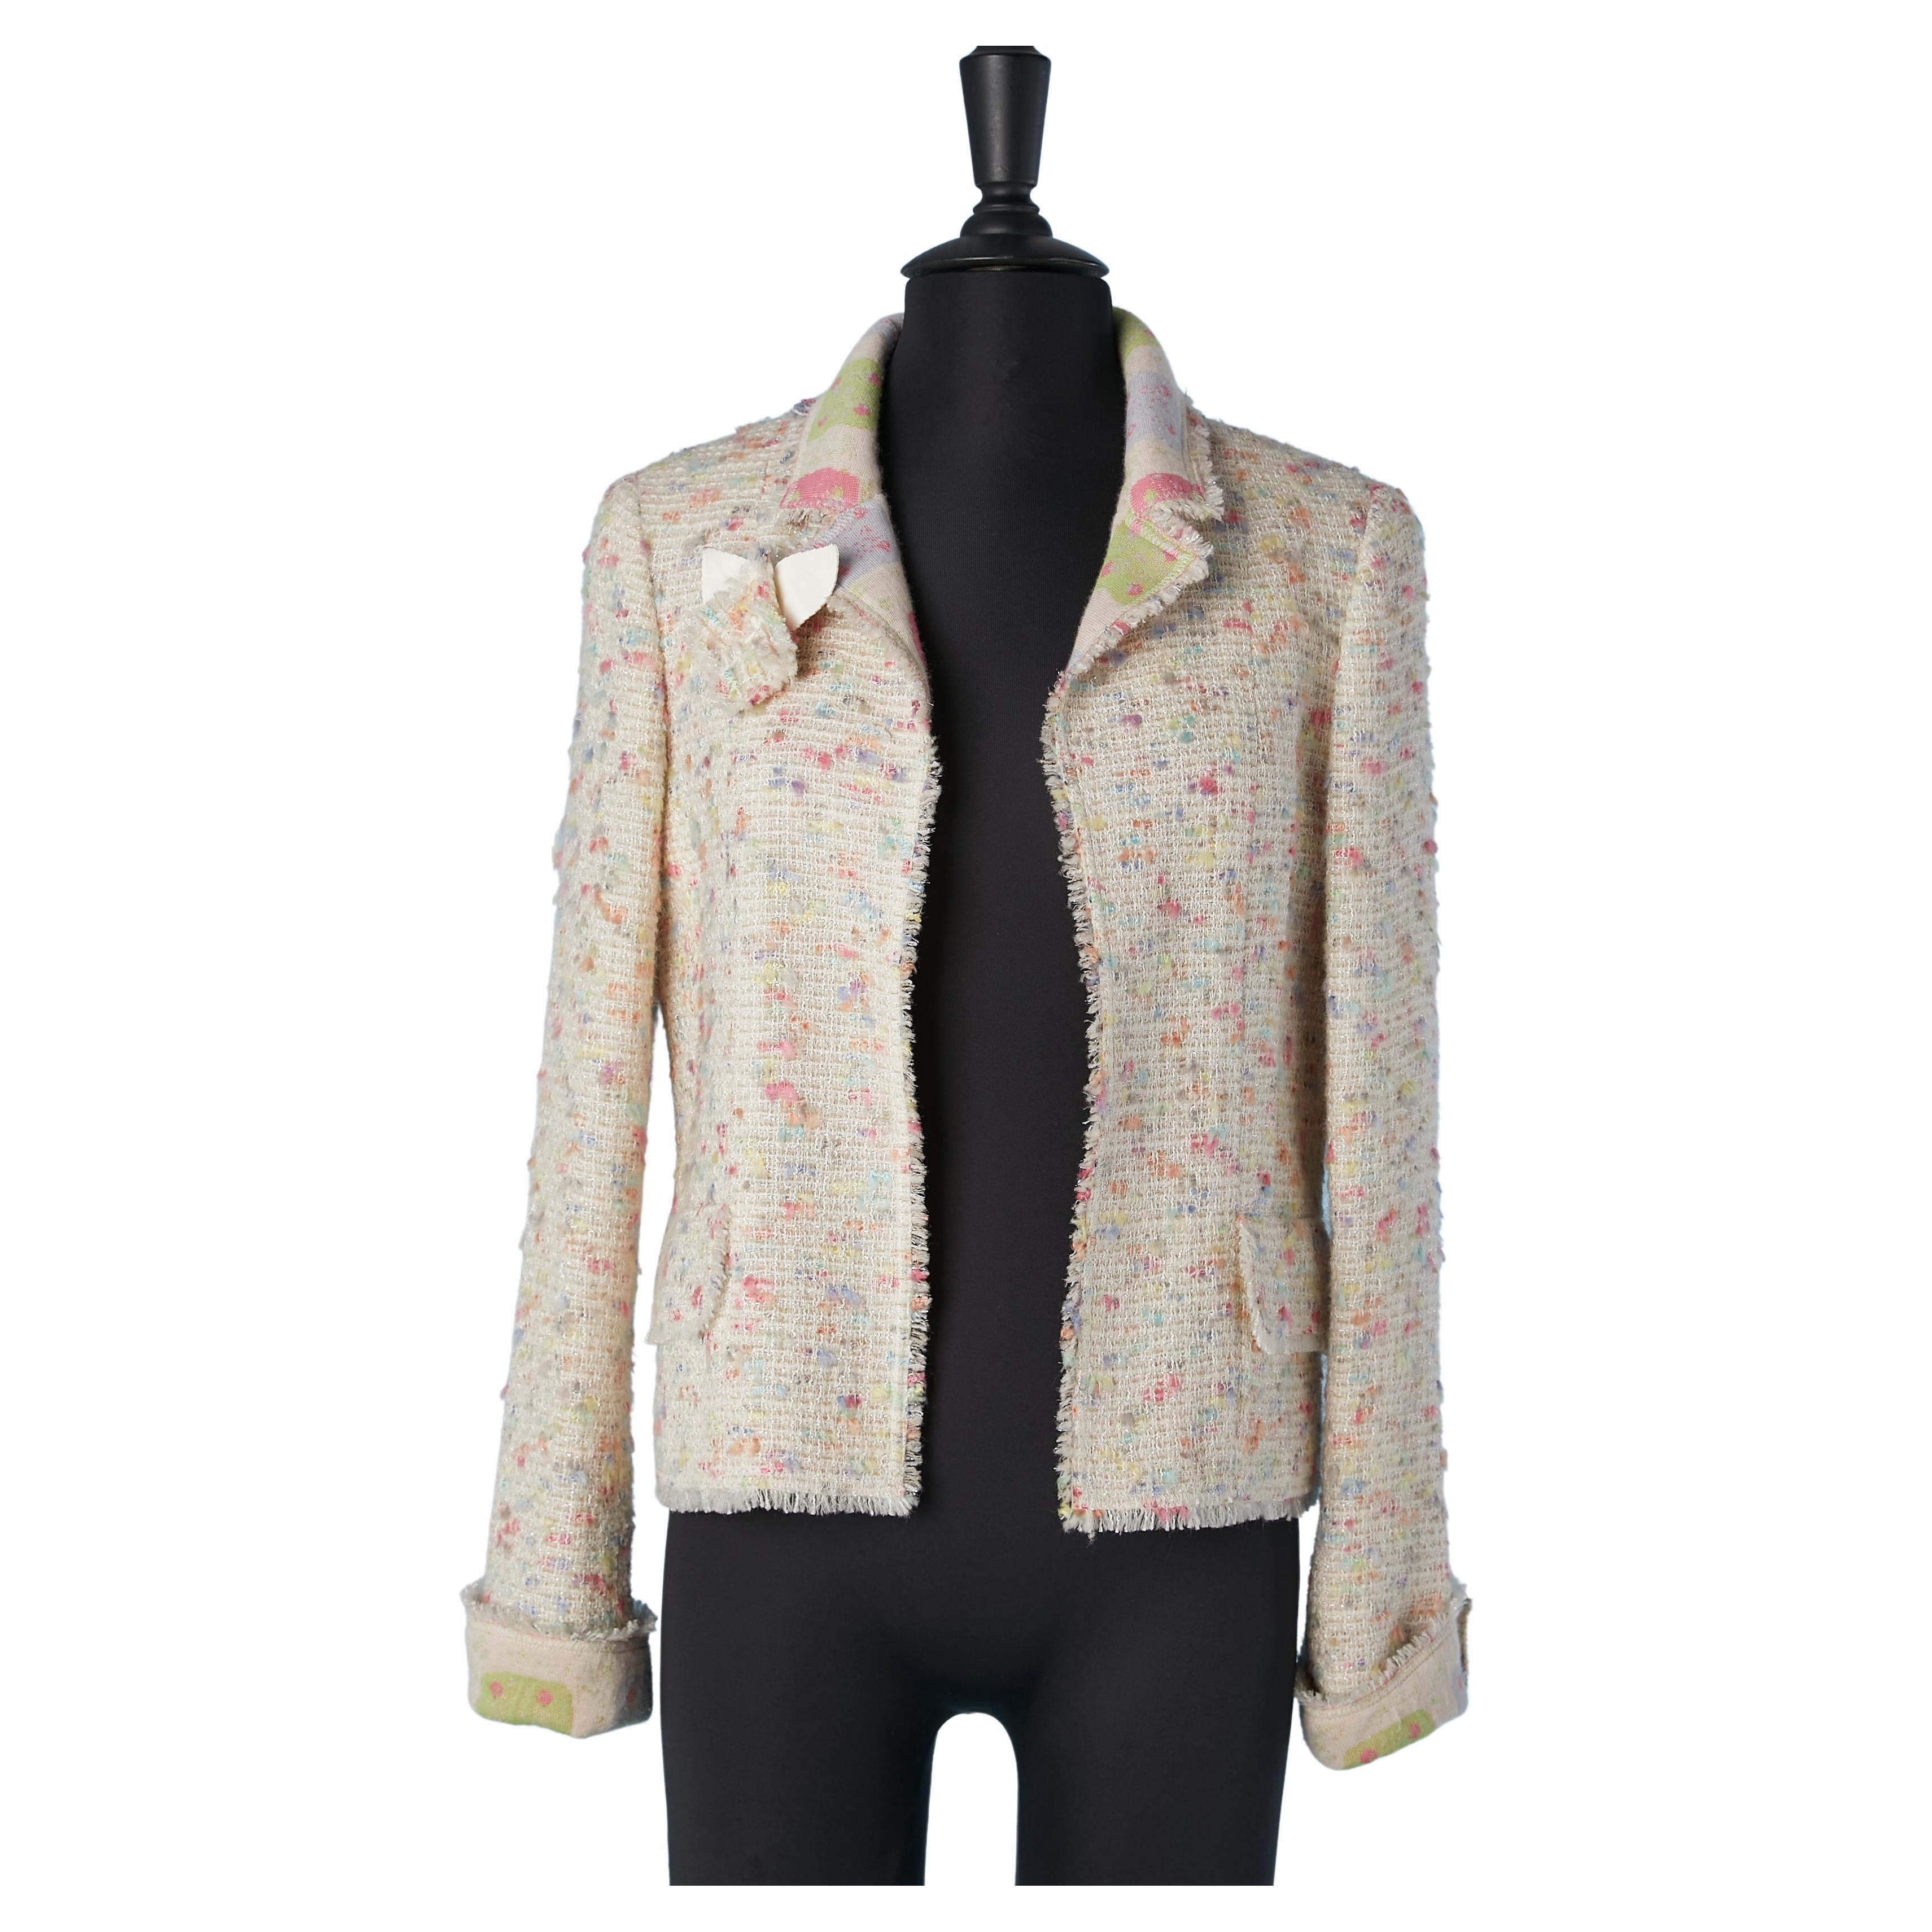 Pastel tweed jacket with flower and jacquard cashmere lining Chanel 